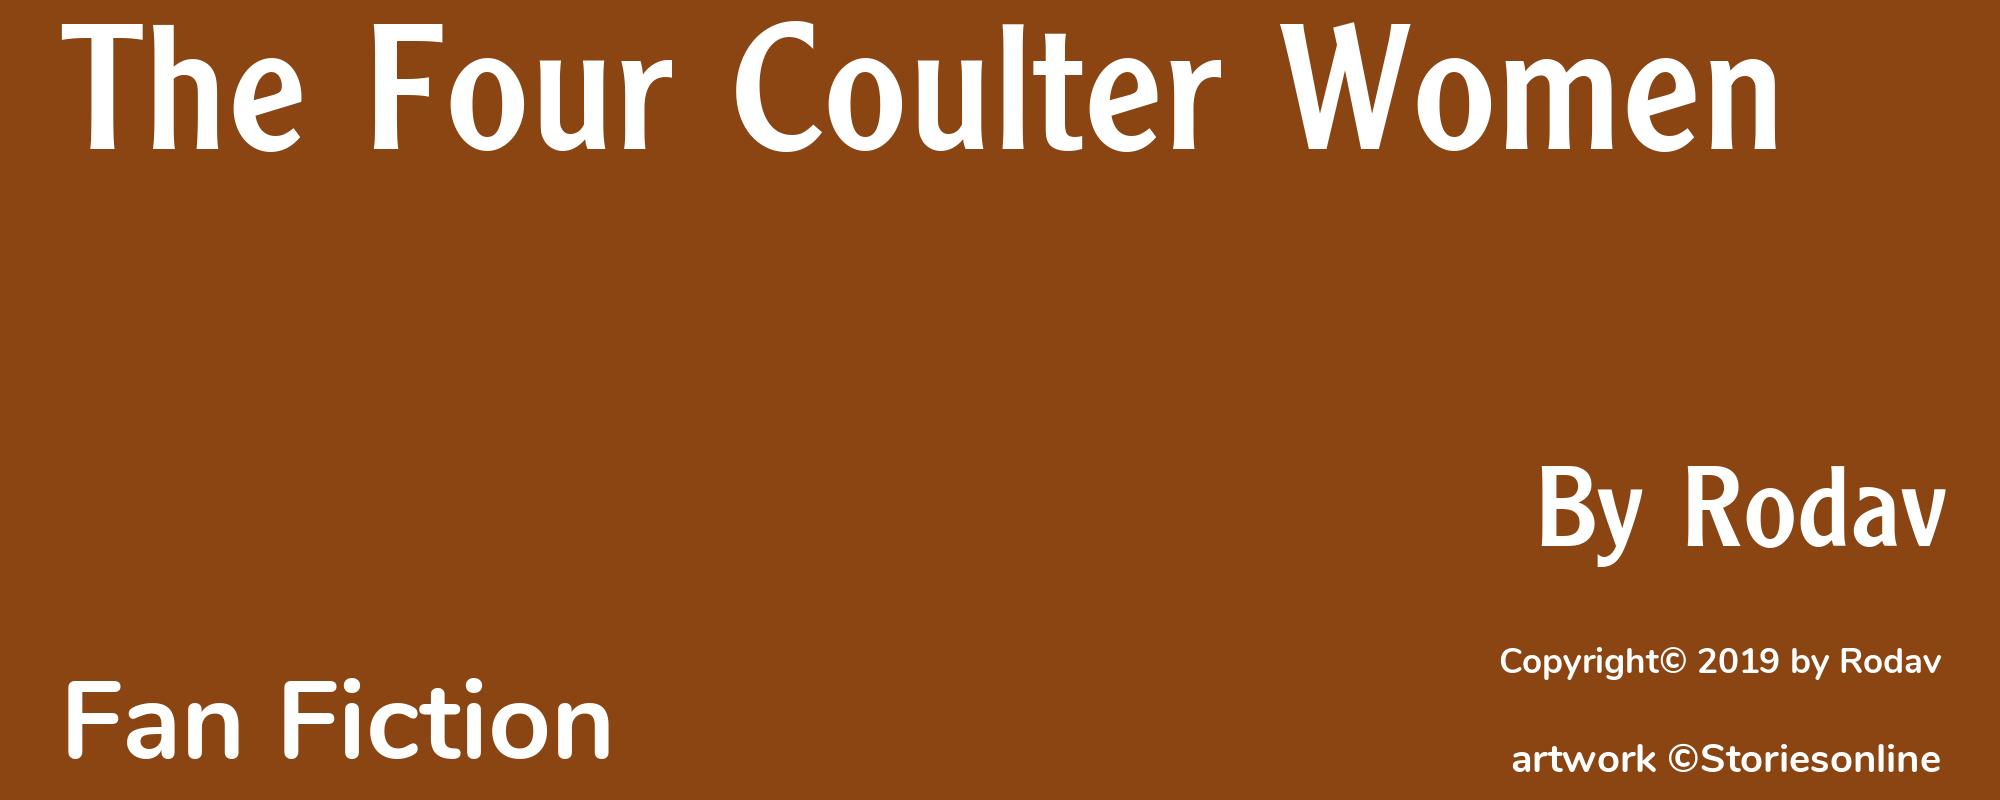 The Four Coulter Women - Cover